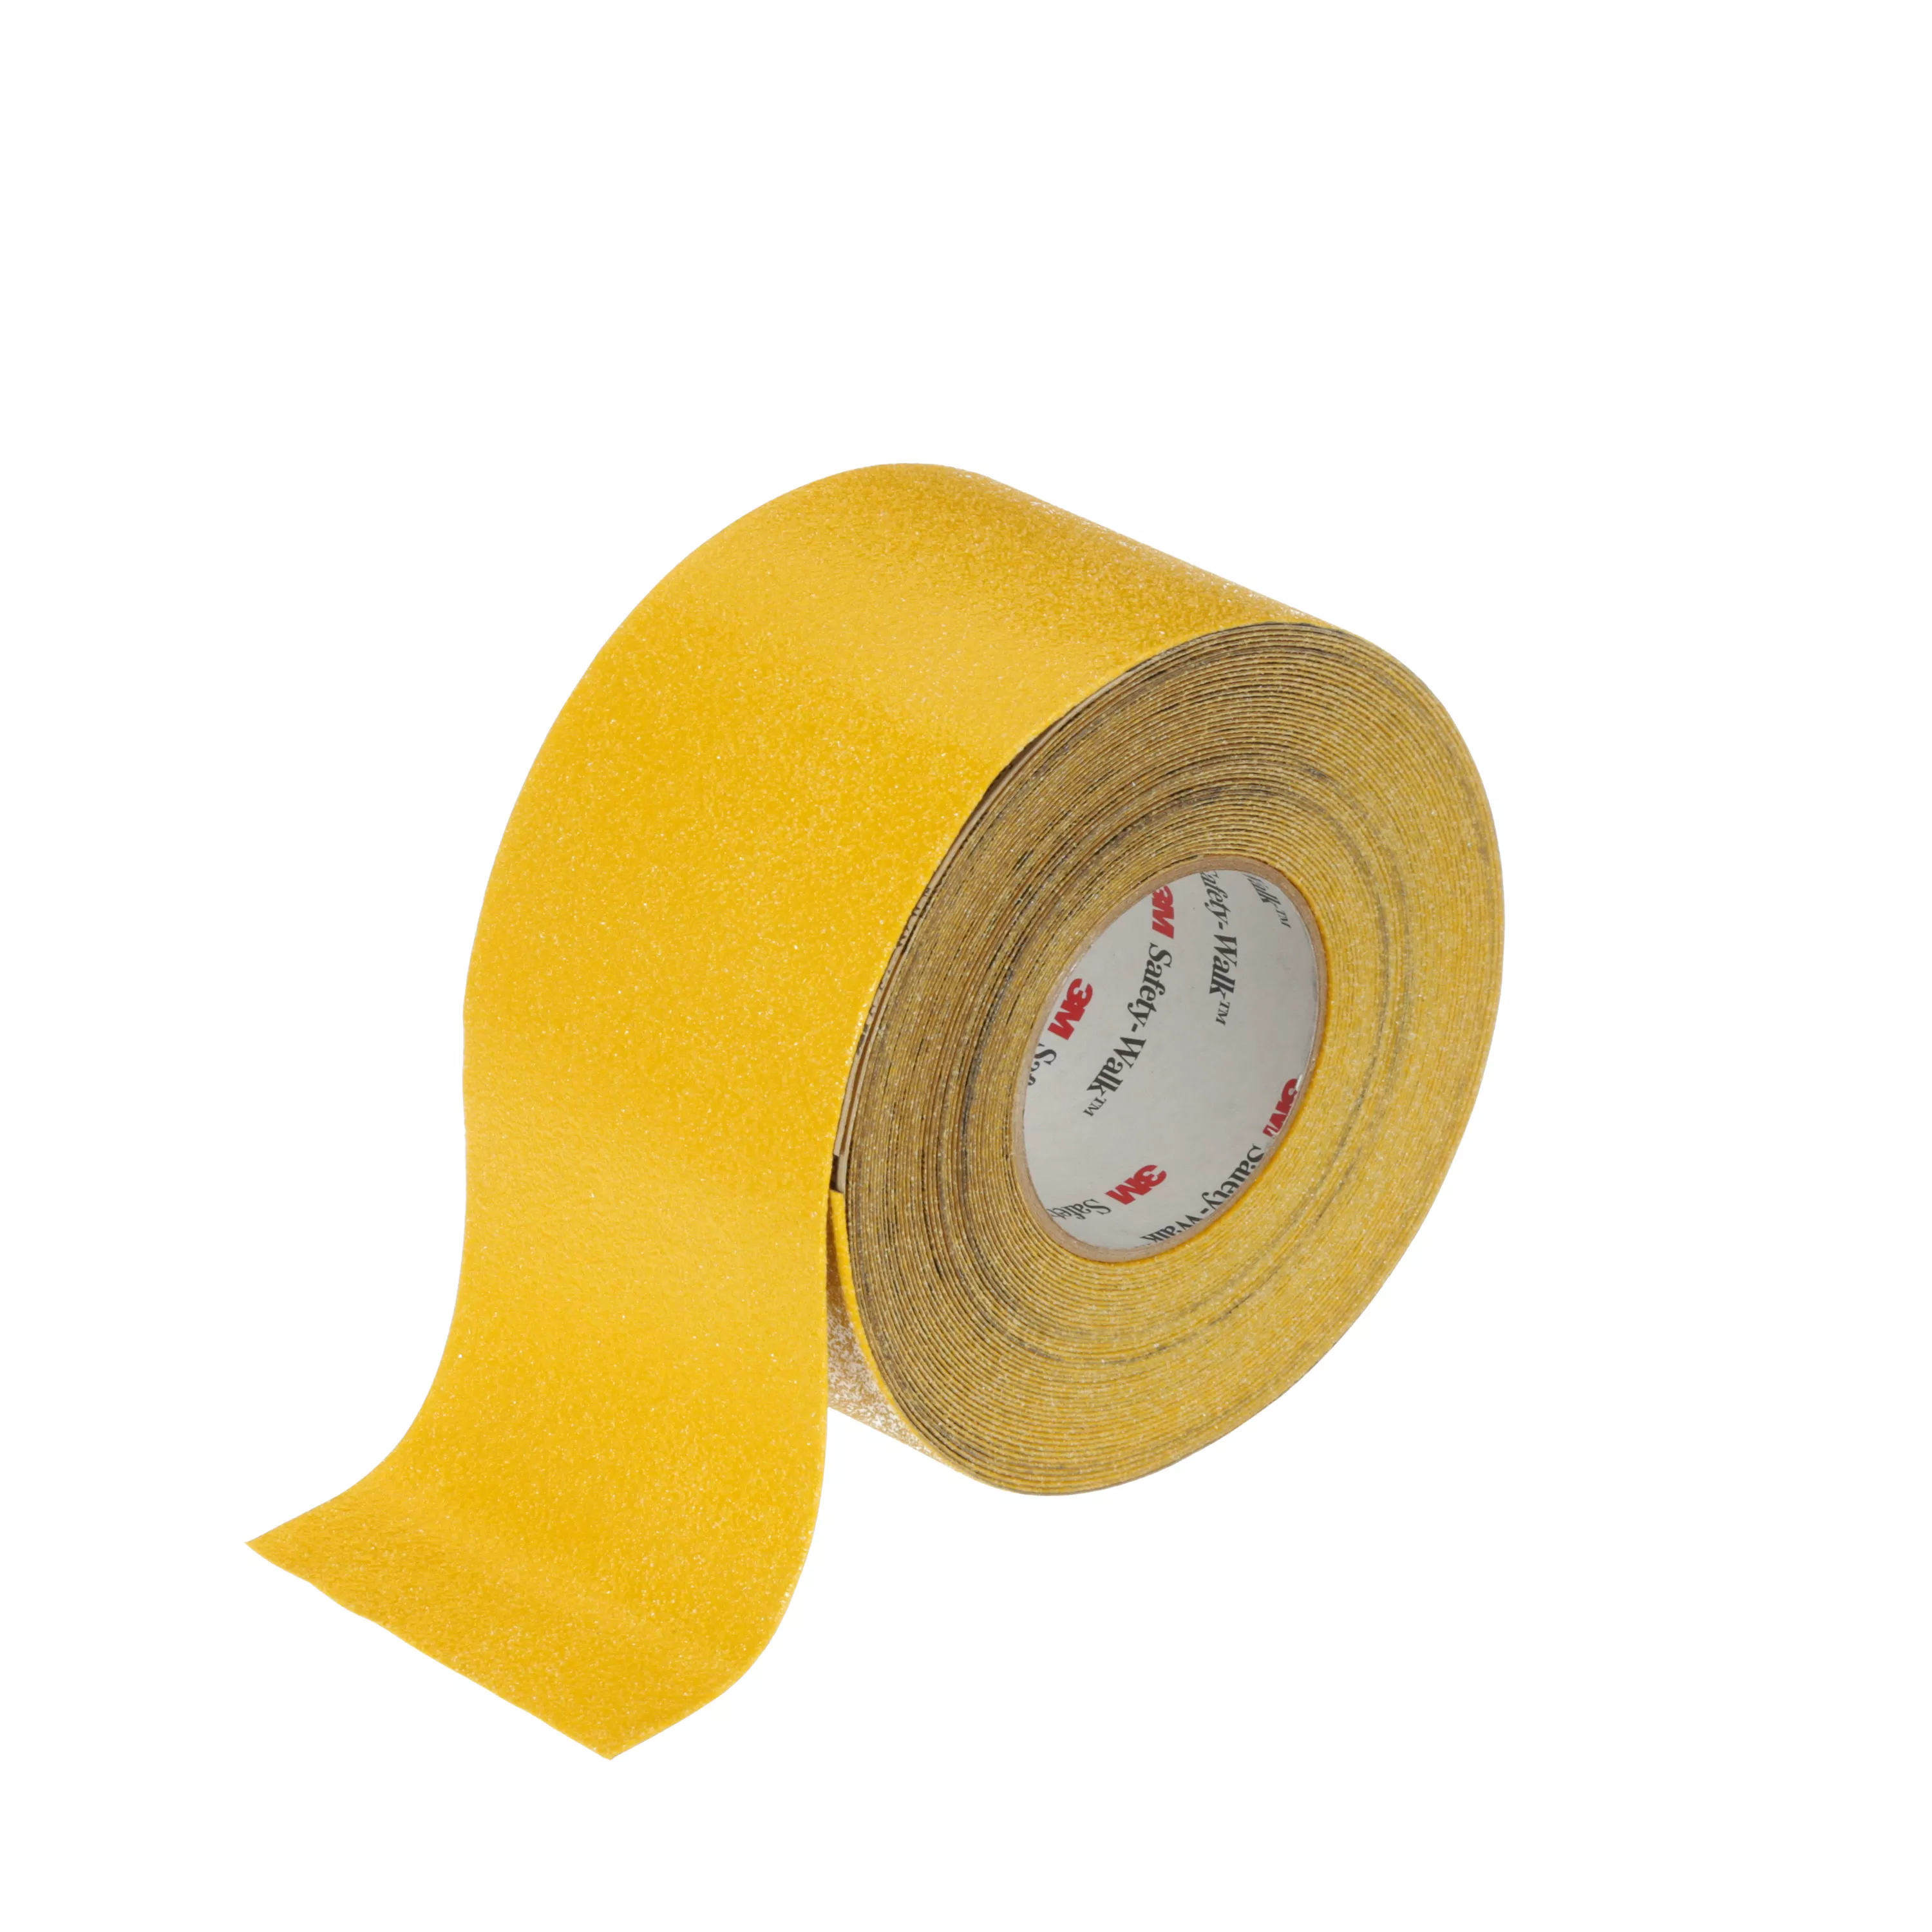 SKU 7000051949 | 3M™ Safety-Walk™ Slip-Resistant Conformable Tapes & Treads 530